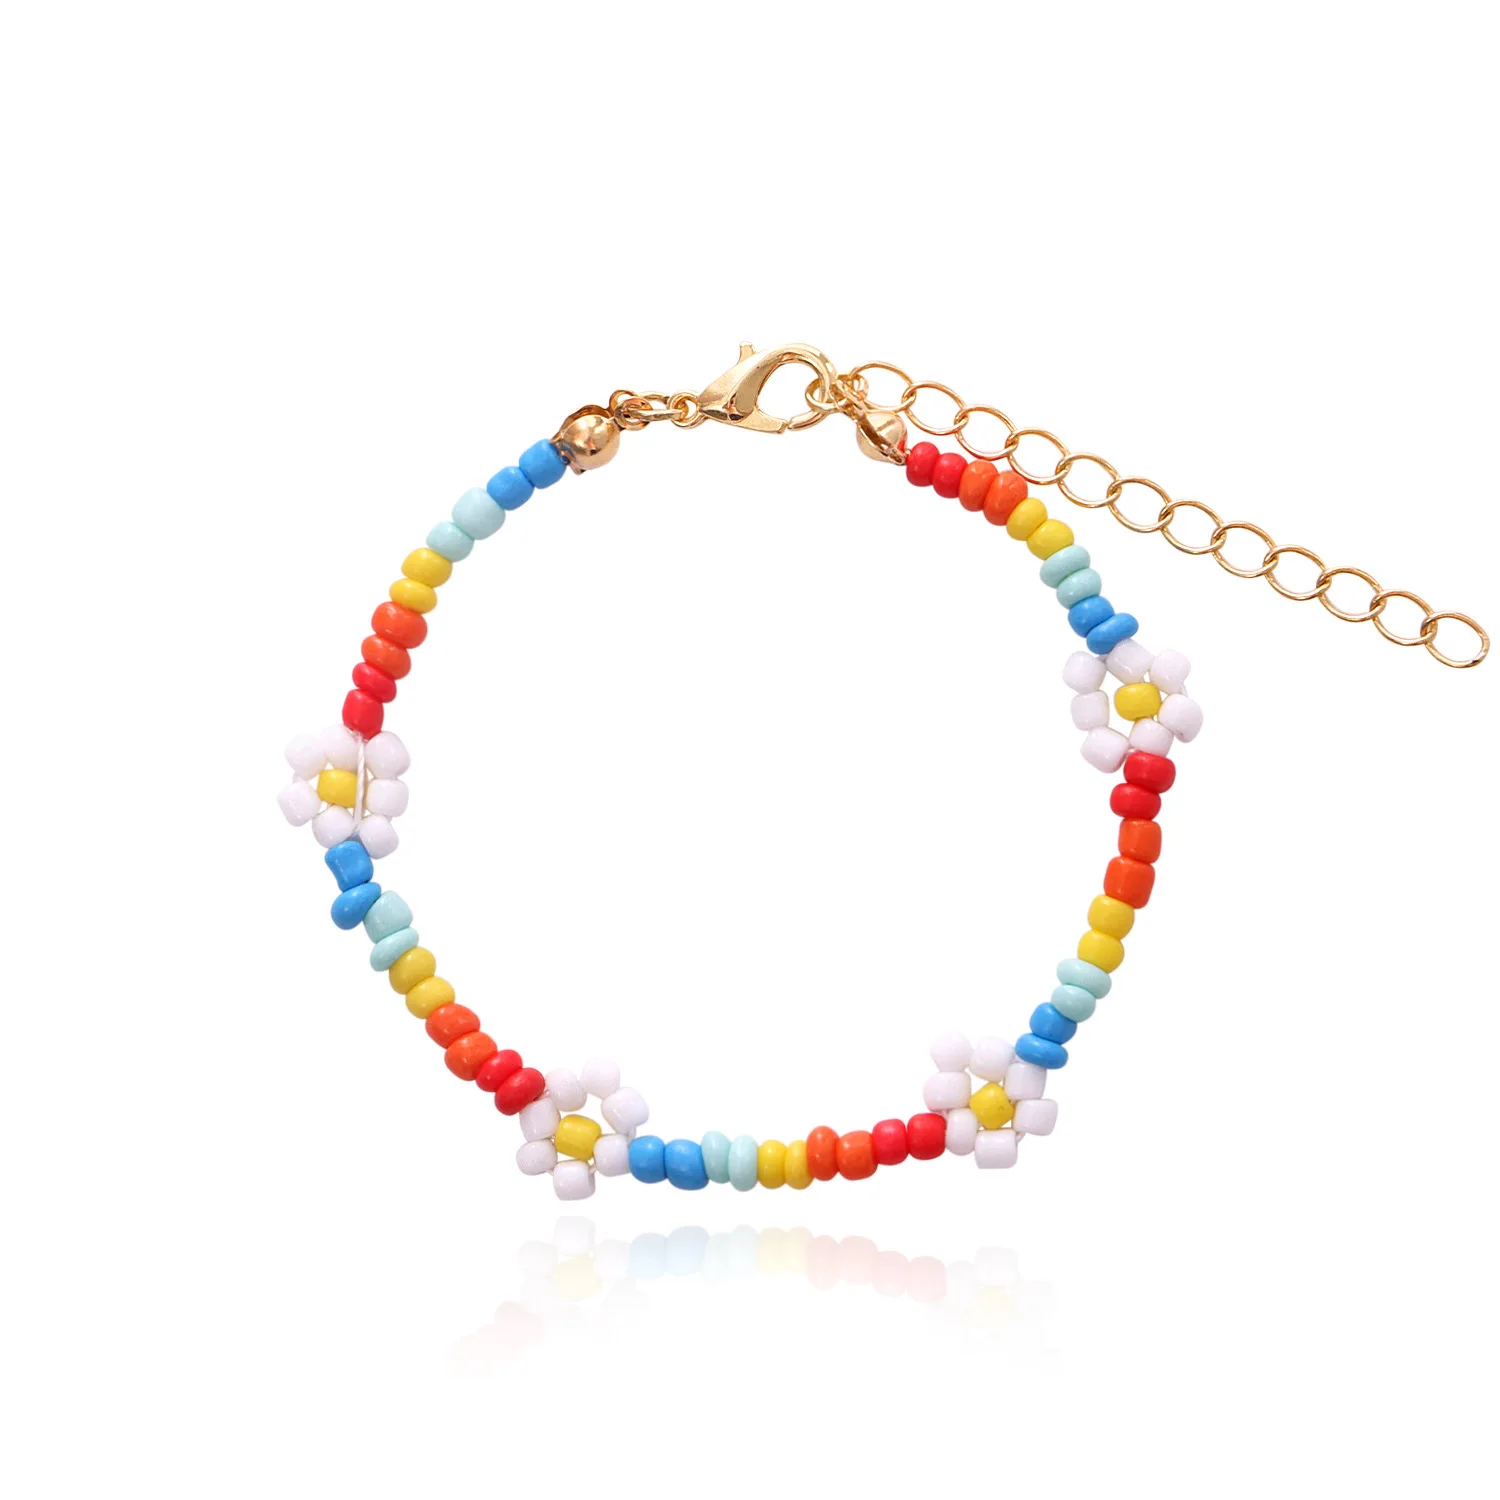 

2021 New Lovely Daisy Flowers Colorful Beaded Charm Statement Bracelets Bangle for Women Vacation Jewelry Gift